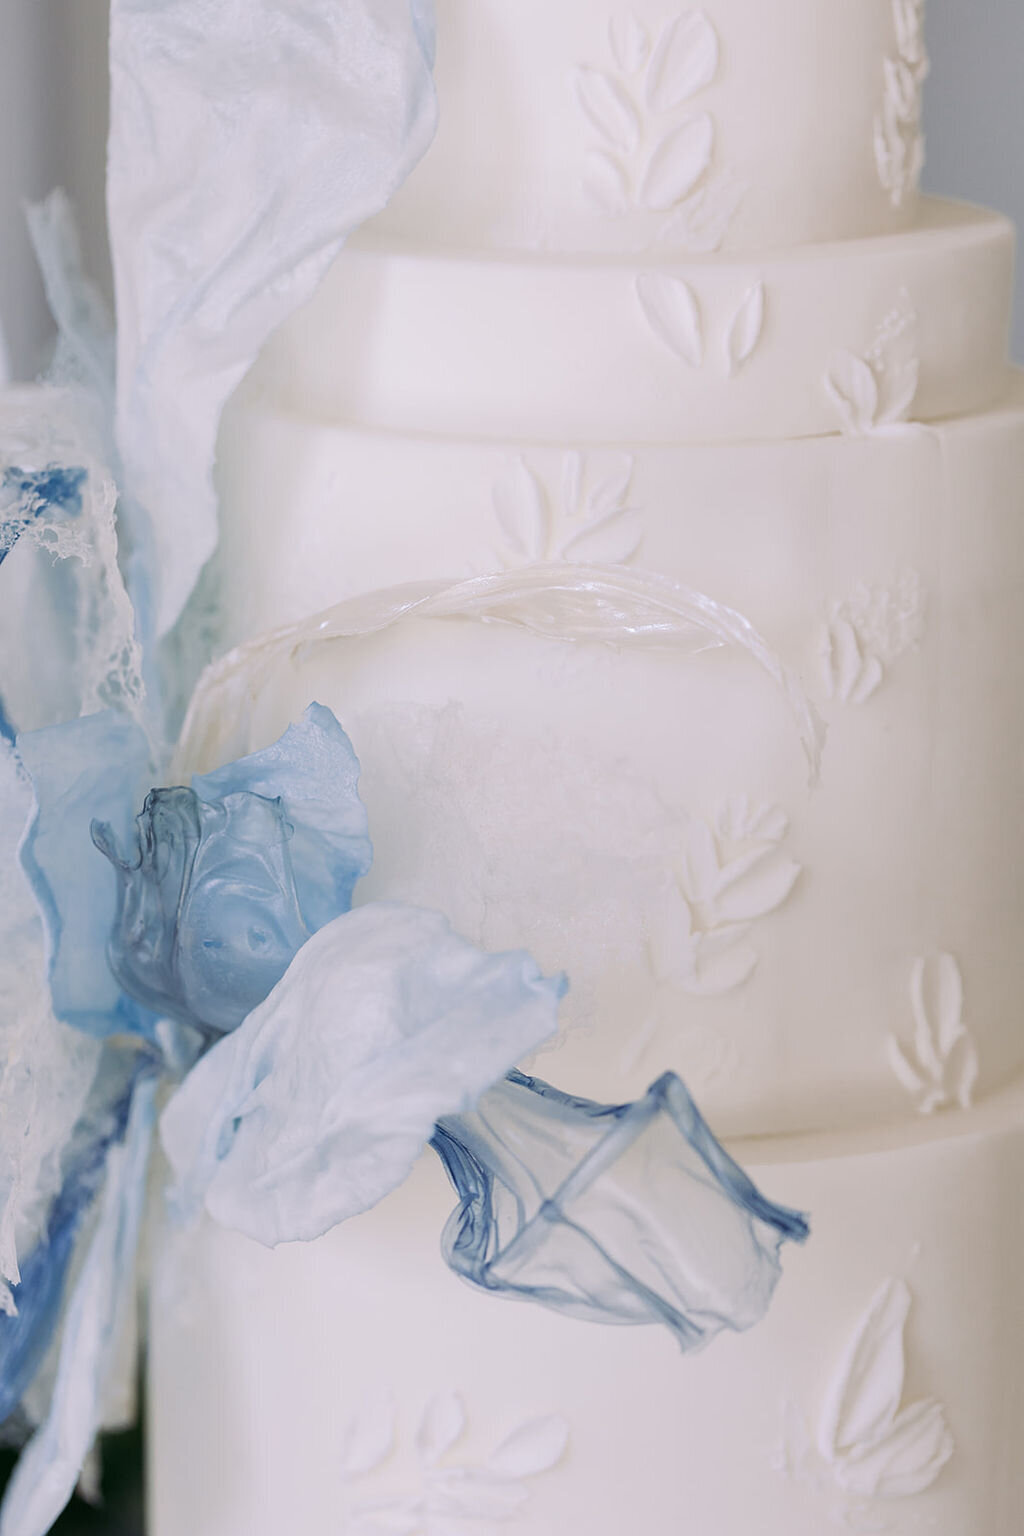 Wedding Cake in shades of blue